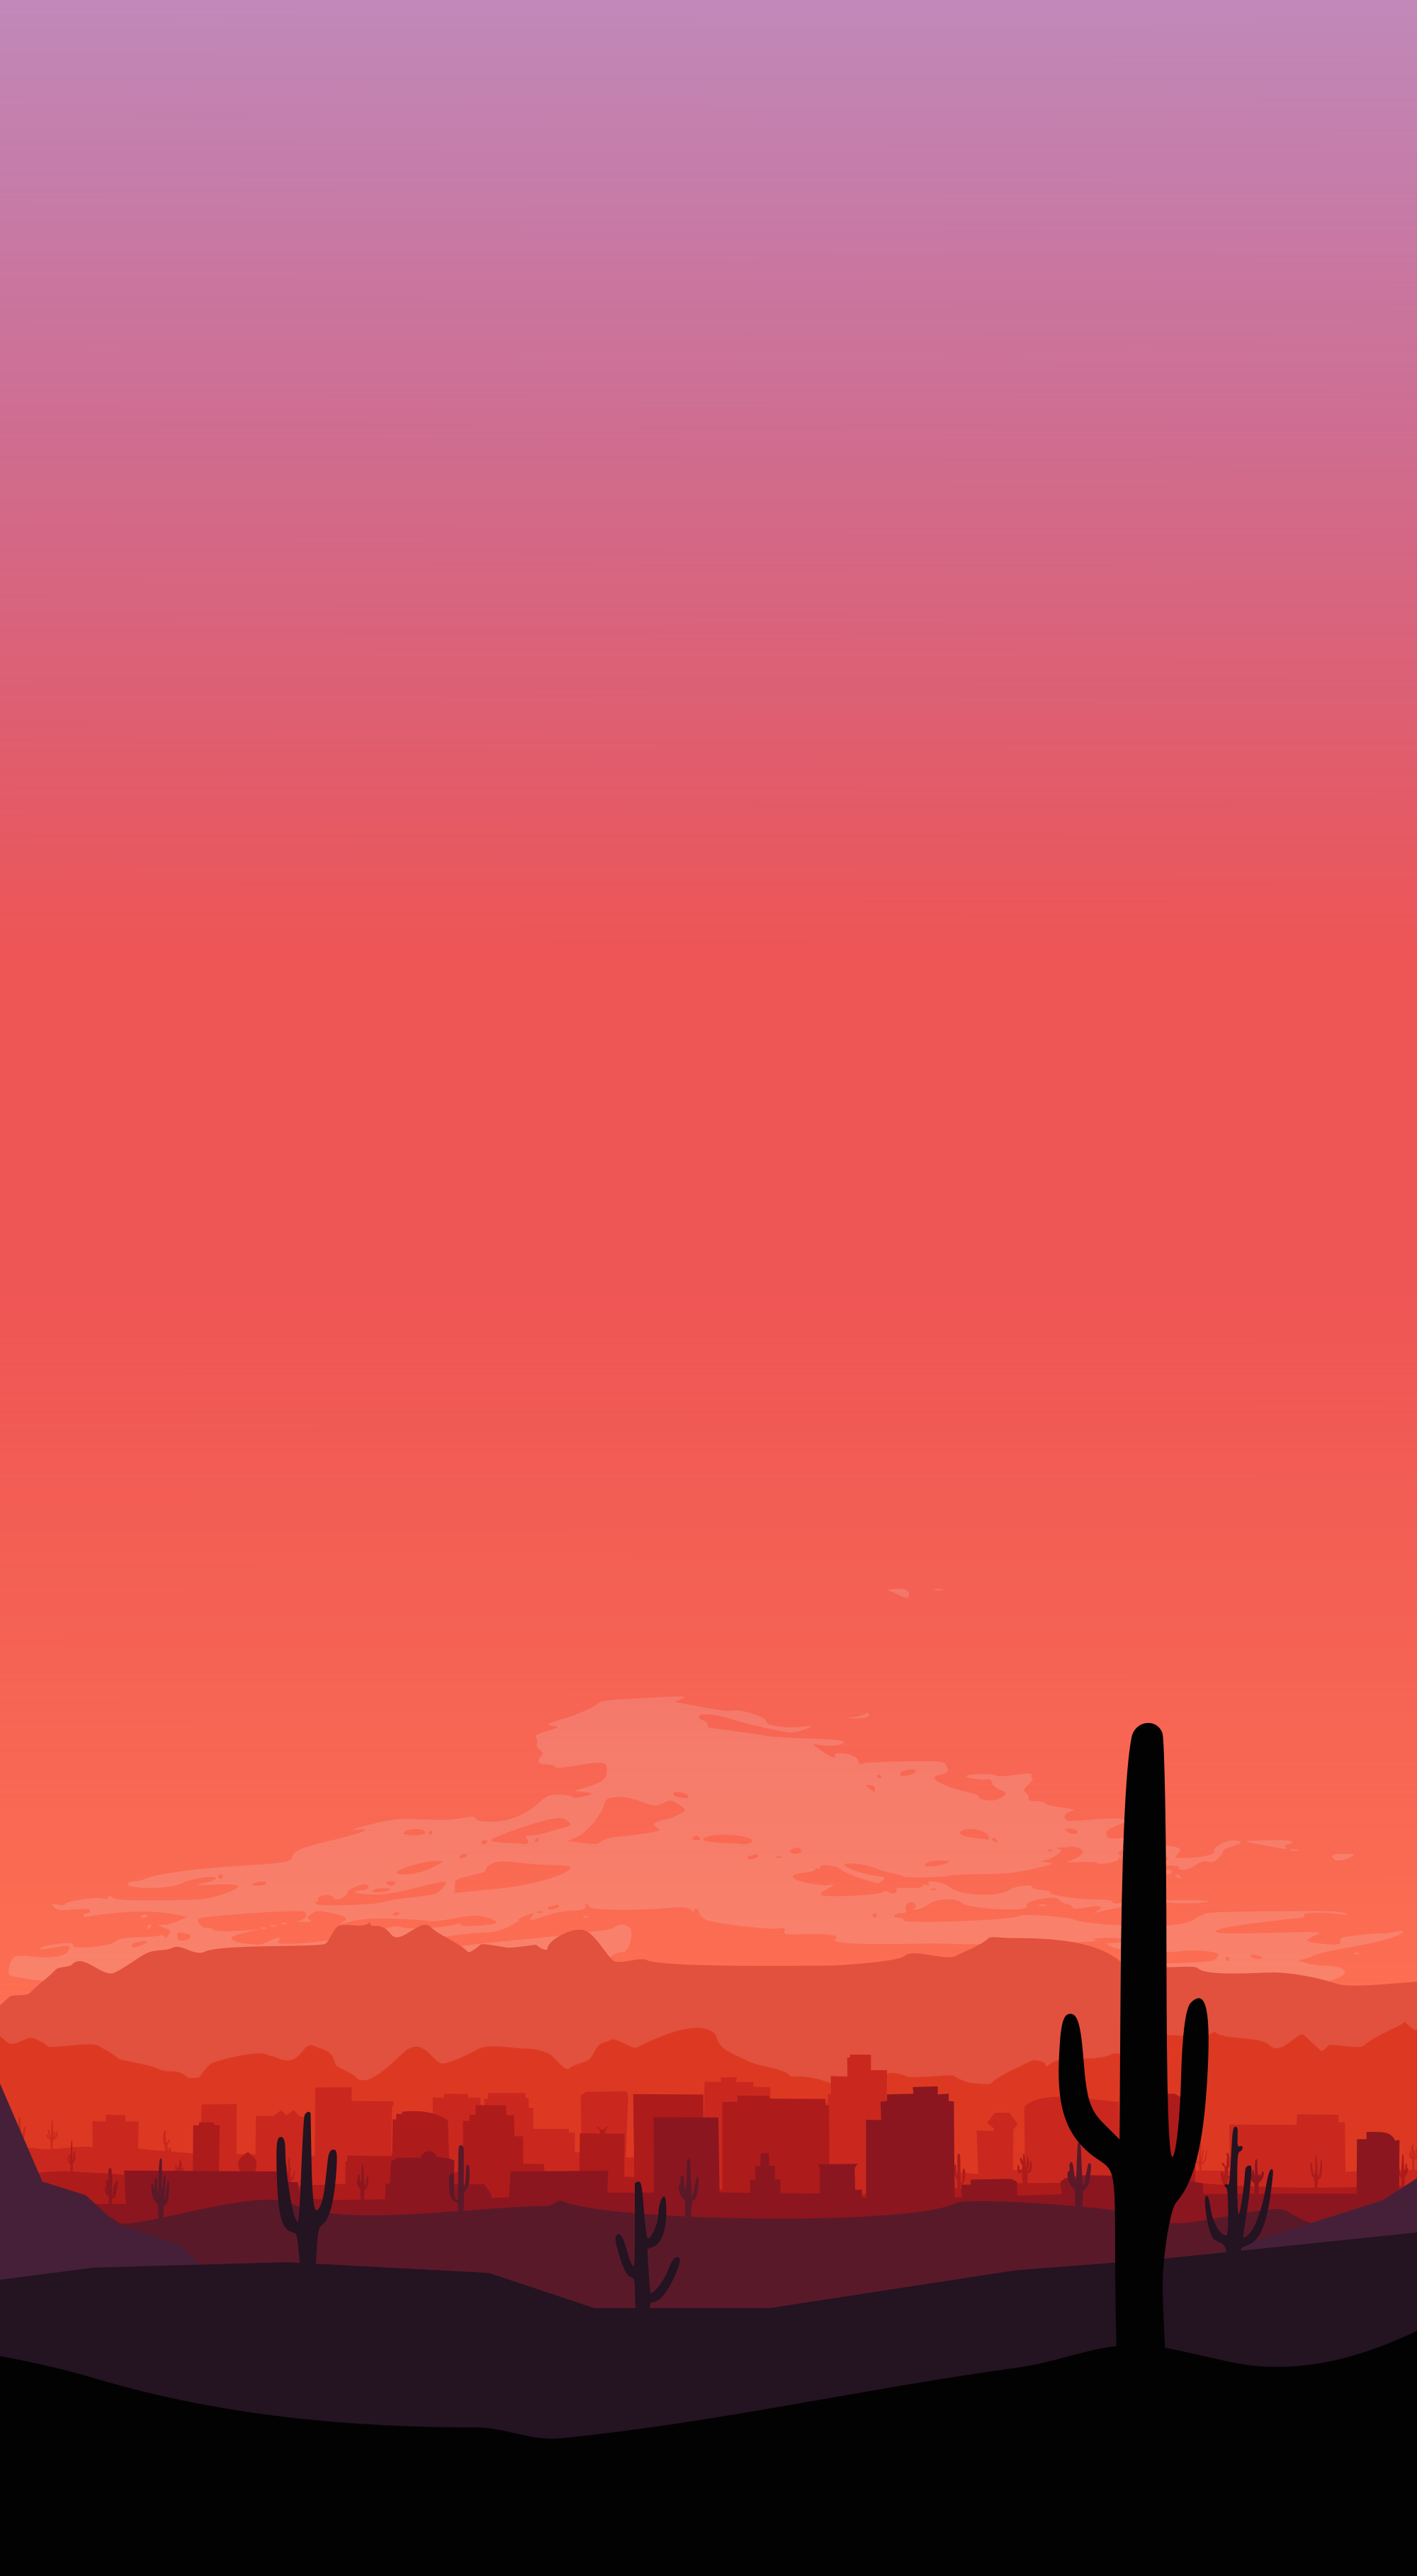 I created an iPhone wallpaper for your city phoenix